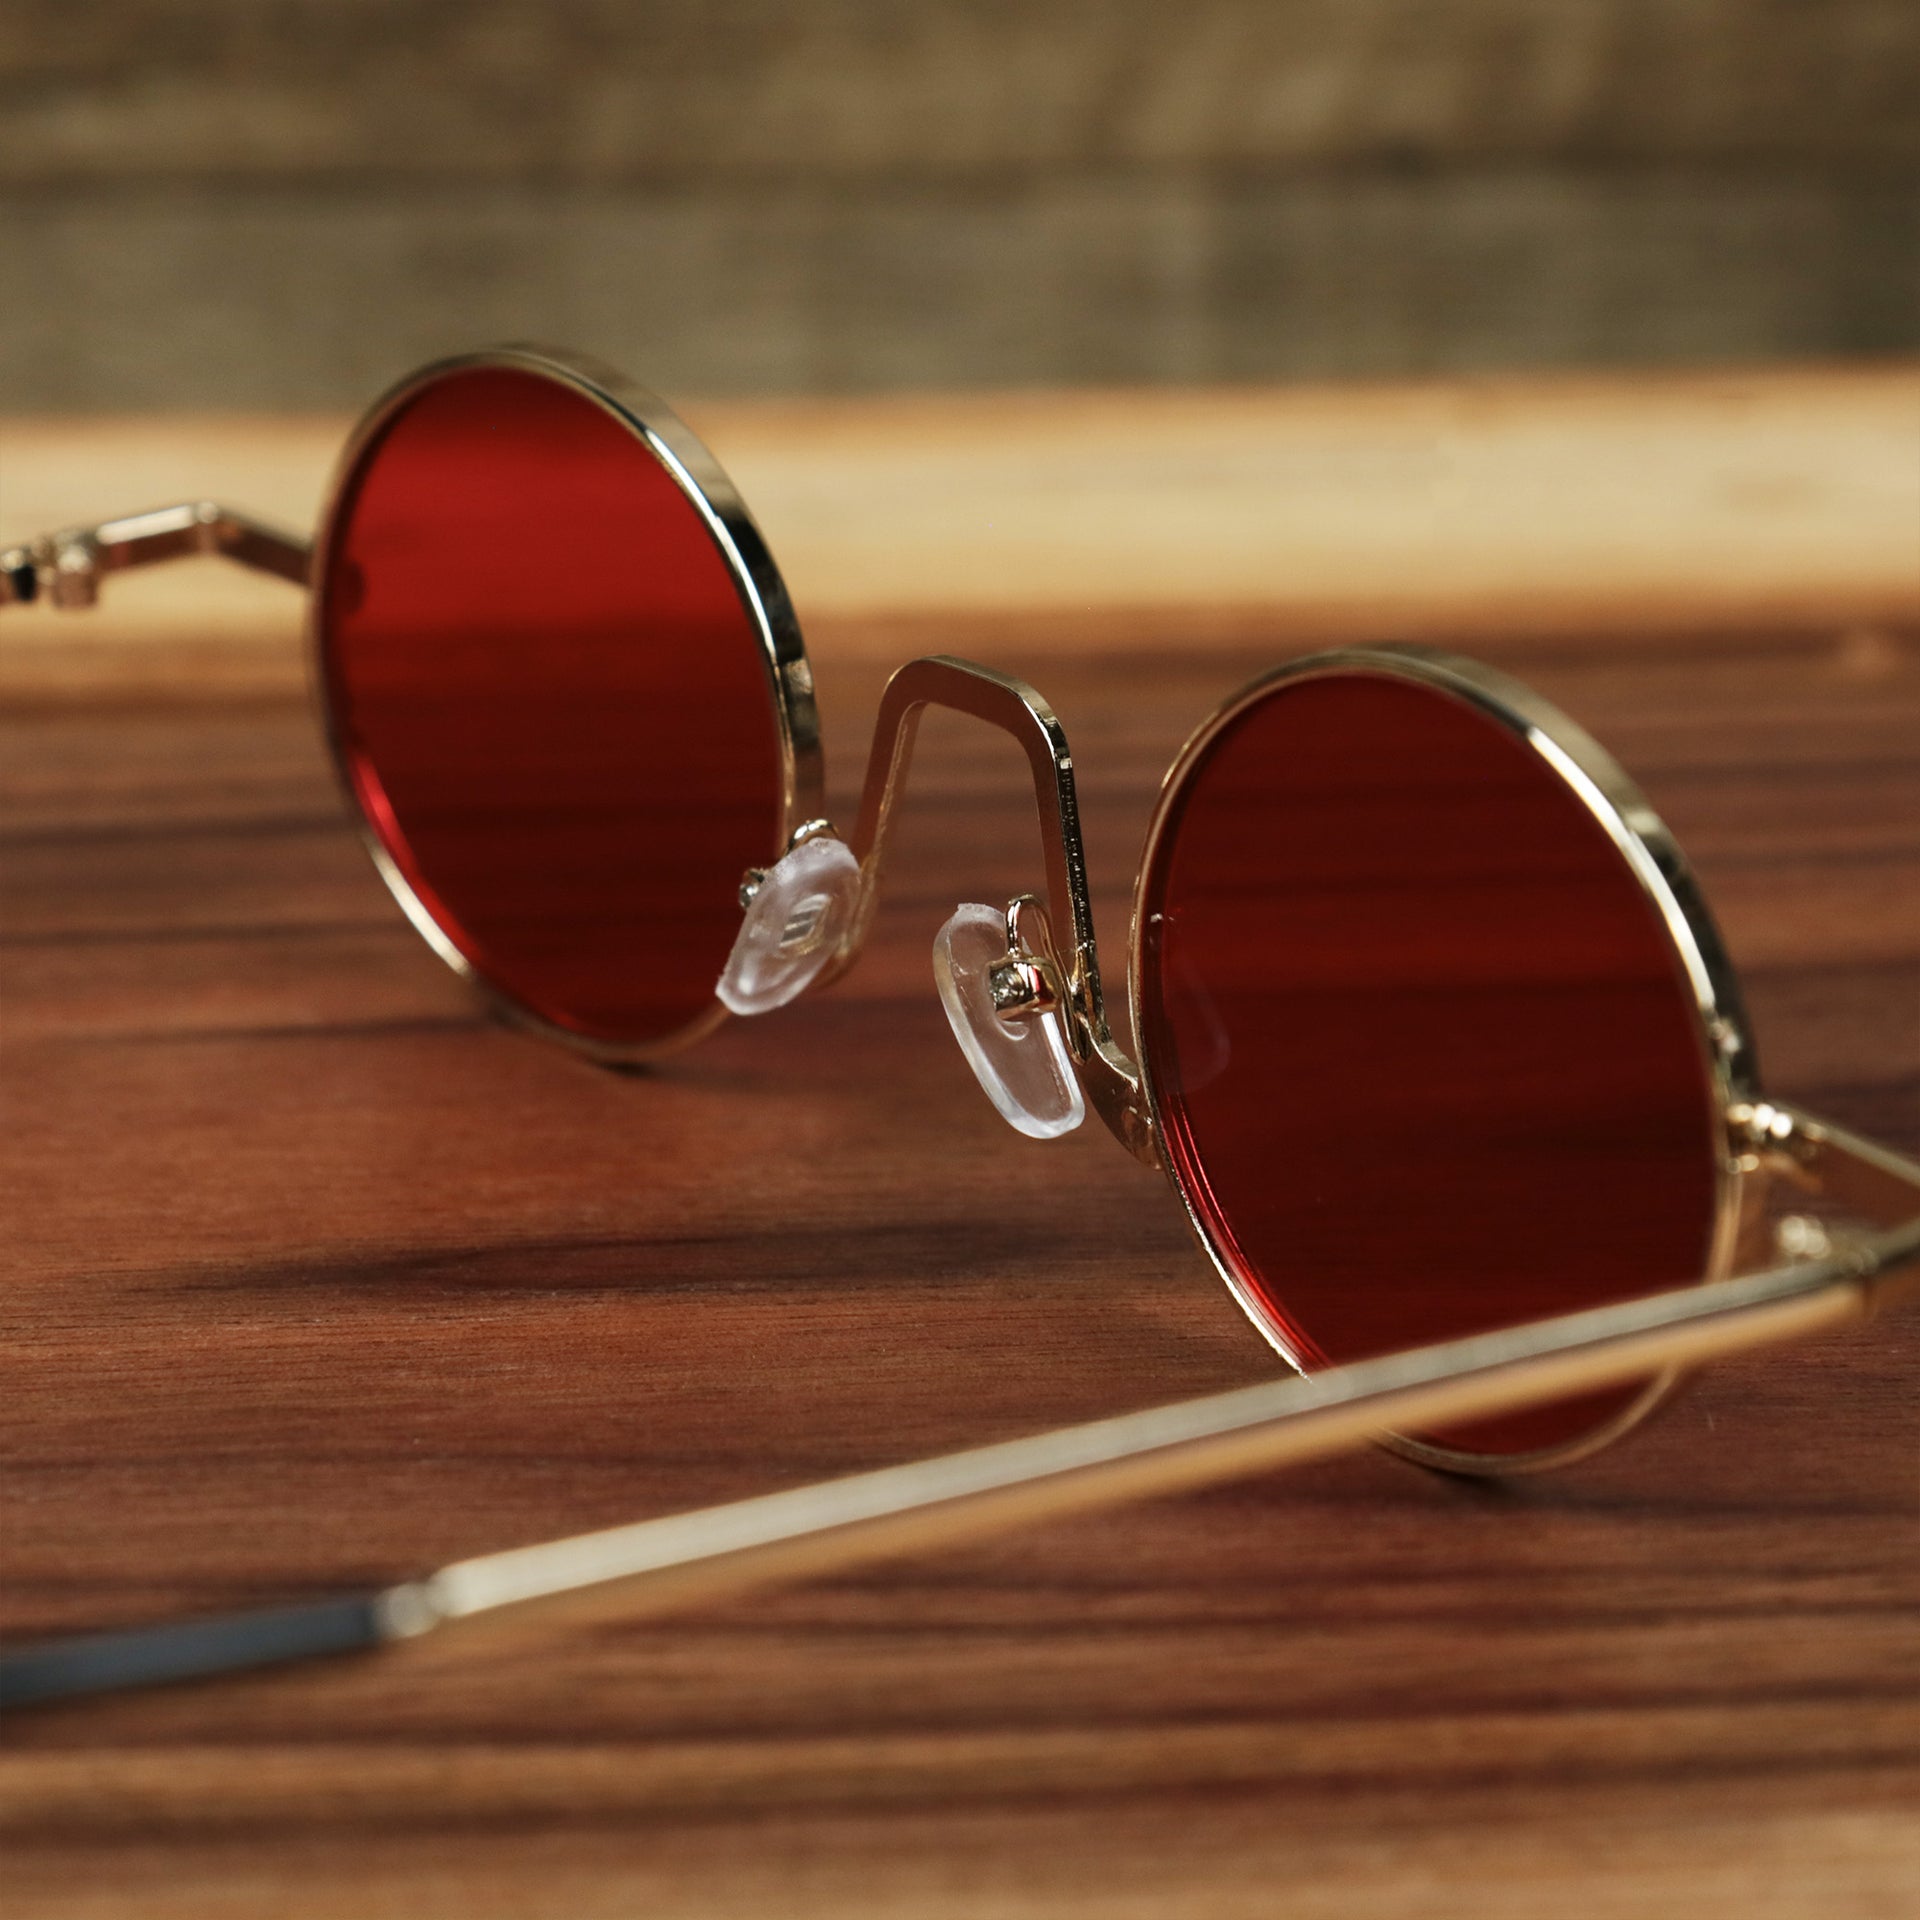 The inside of the Round Frames Red Lens Sunglasses with Gold Frame